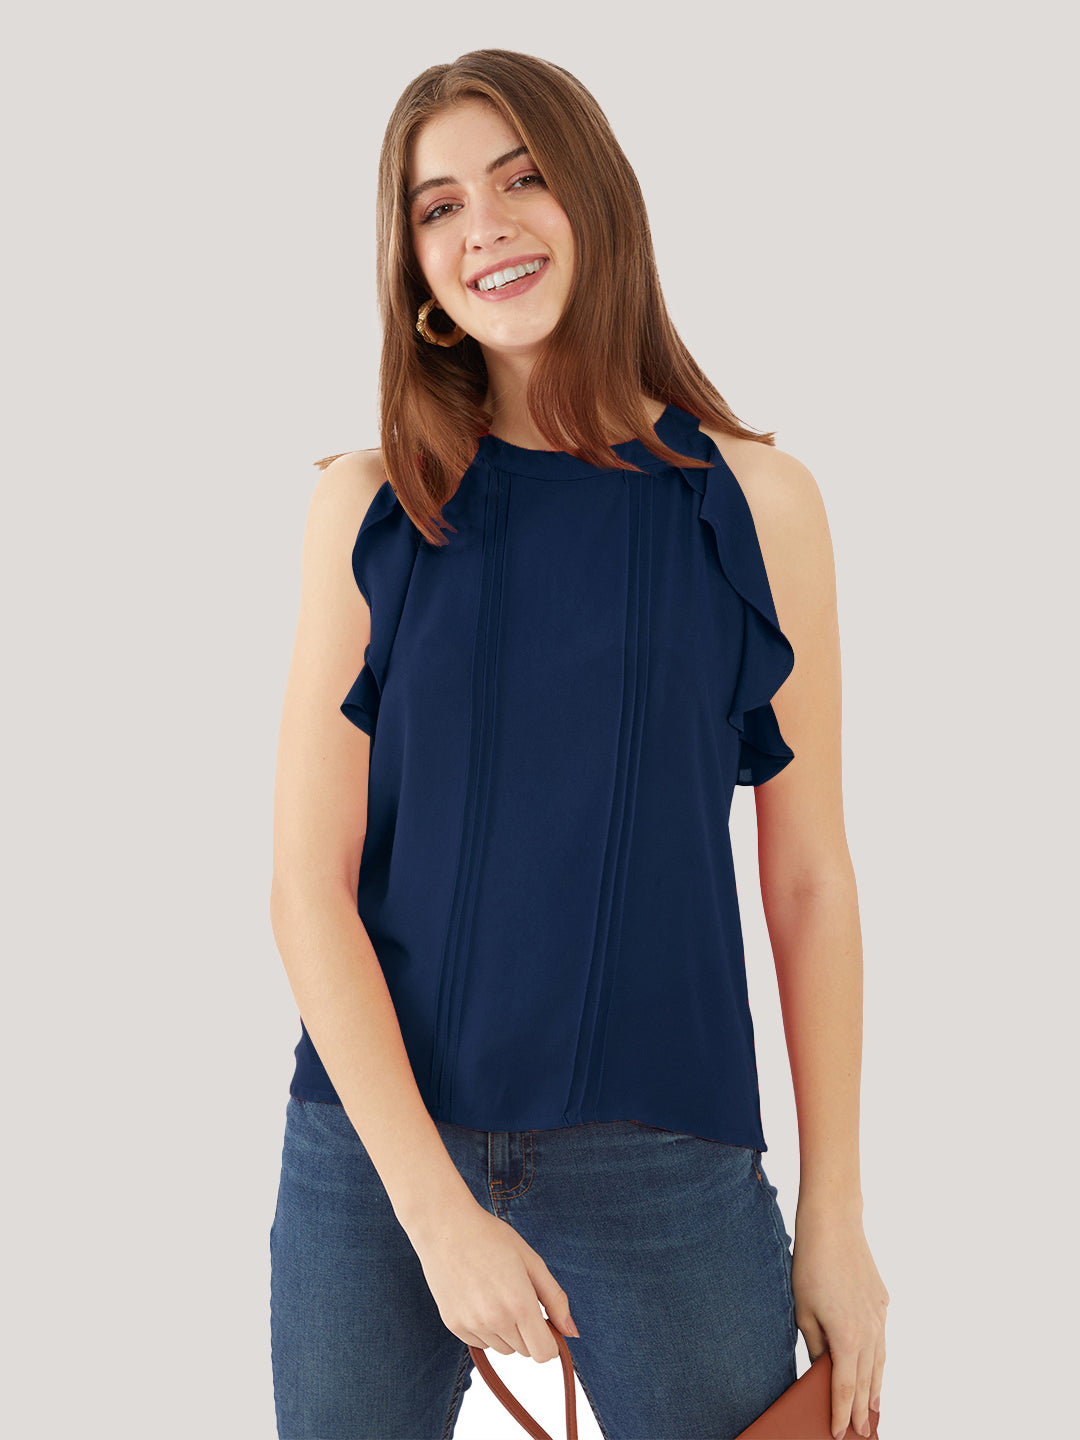 Navy-Blue-Solid-Ruffled-Top-for-Women-VT02364_106-Navy-1